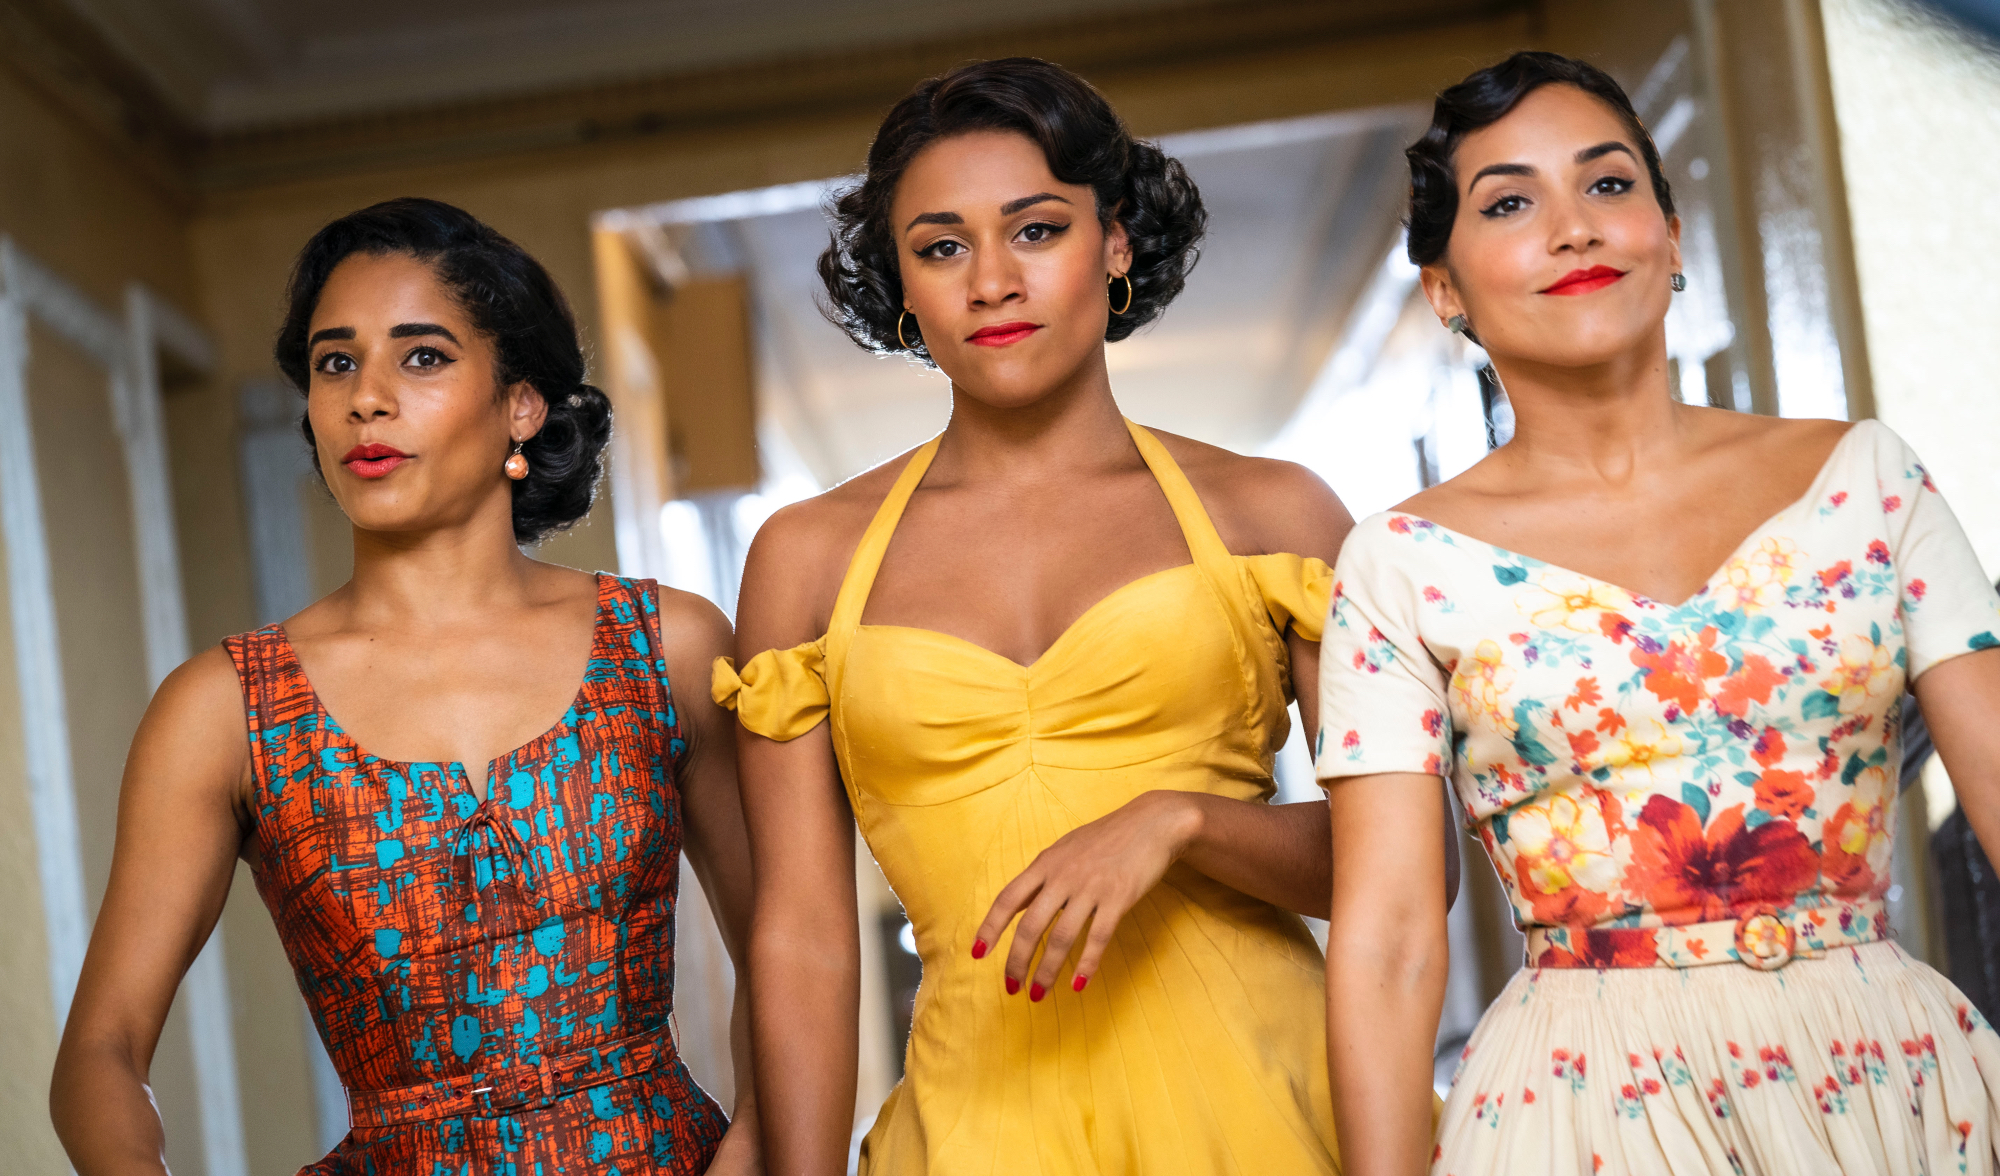 'West Side Story' Ilda Mason as Luz, Ariana DeBose as Anita, and Ana Isabelle as Rosalia in article about box office wearing dresses, walking down a hallway